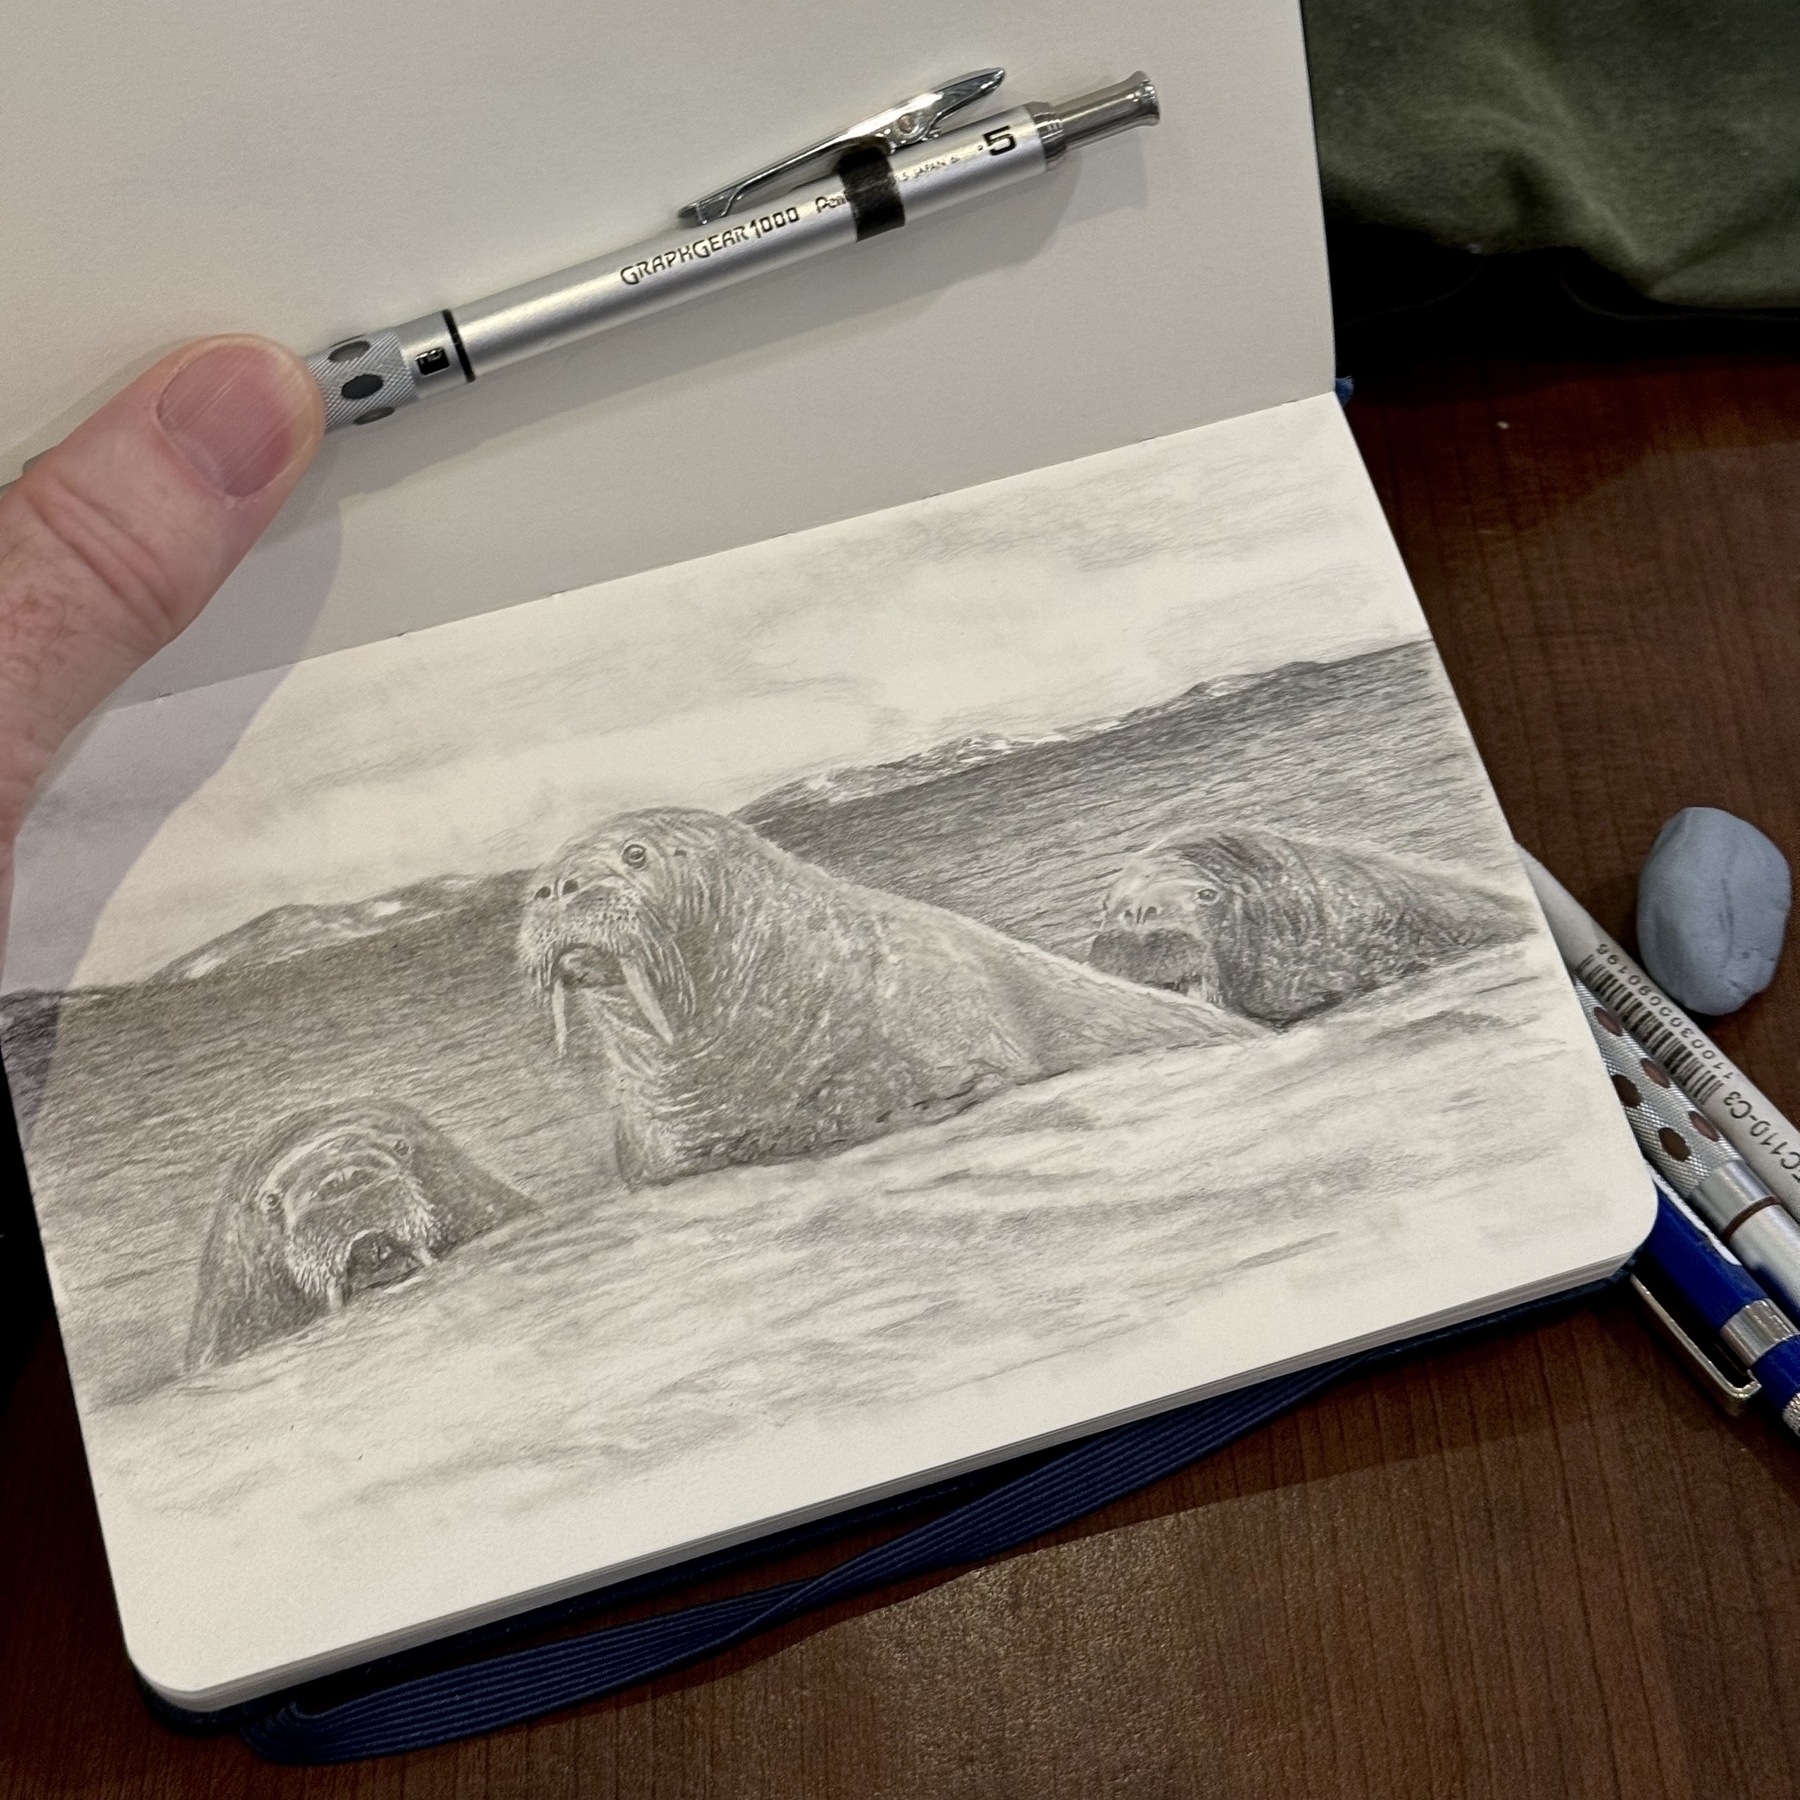 A pencil sketch of three walruses in a sketchbook with a pencil and other tools nearby